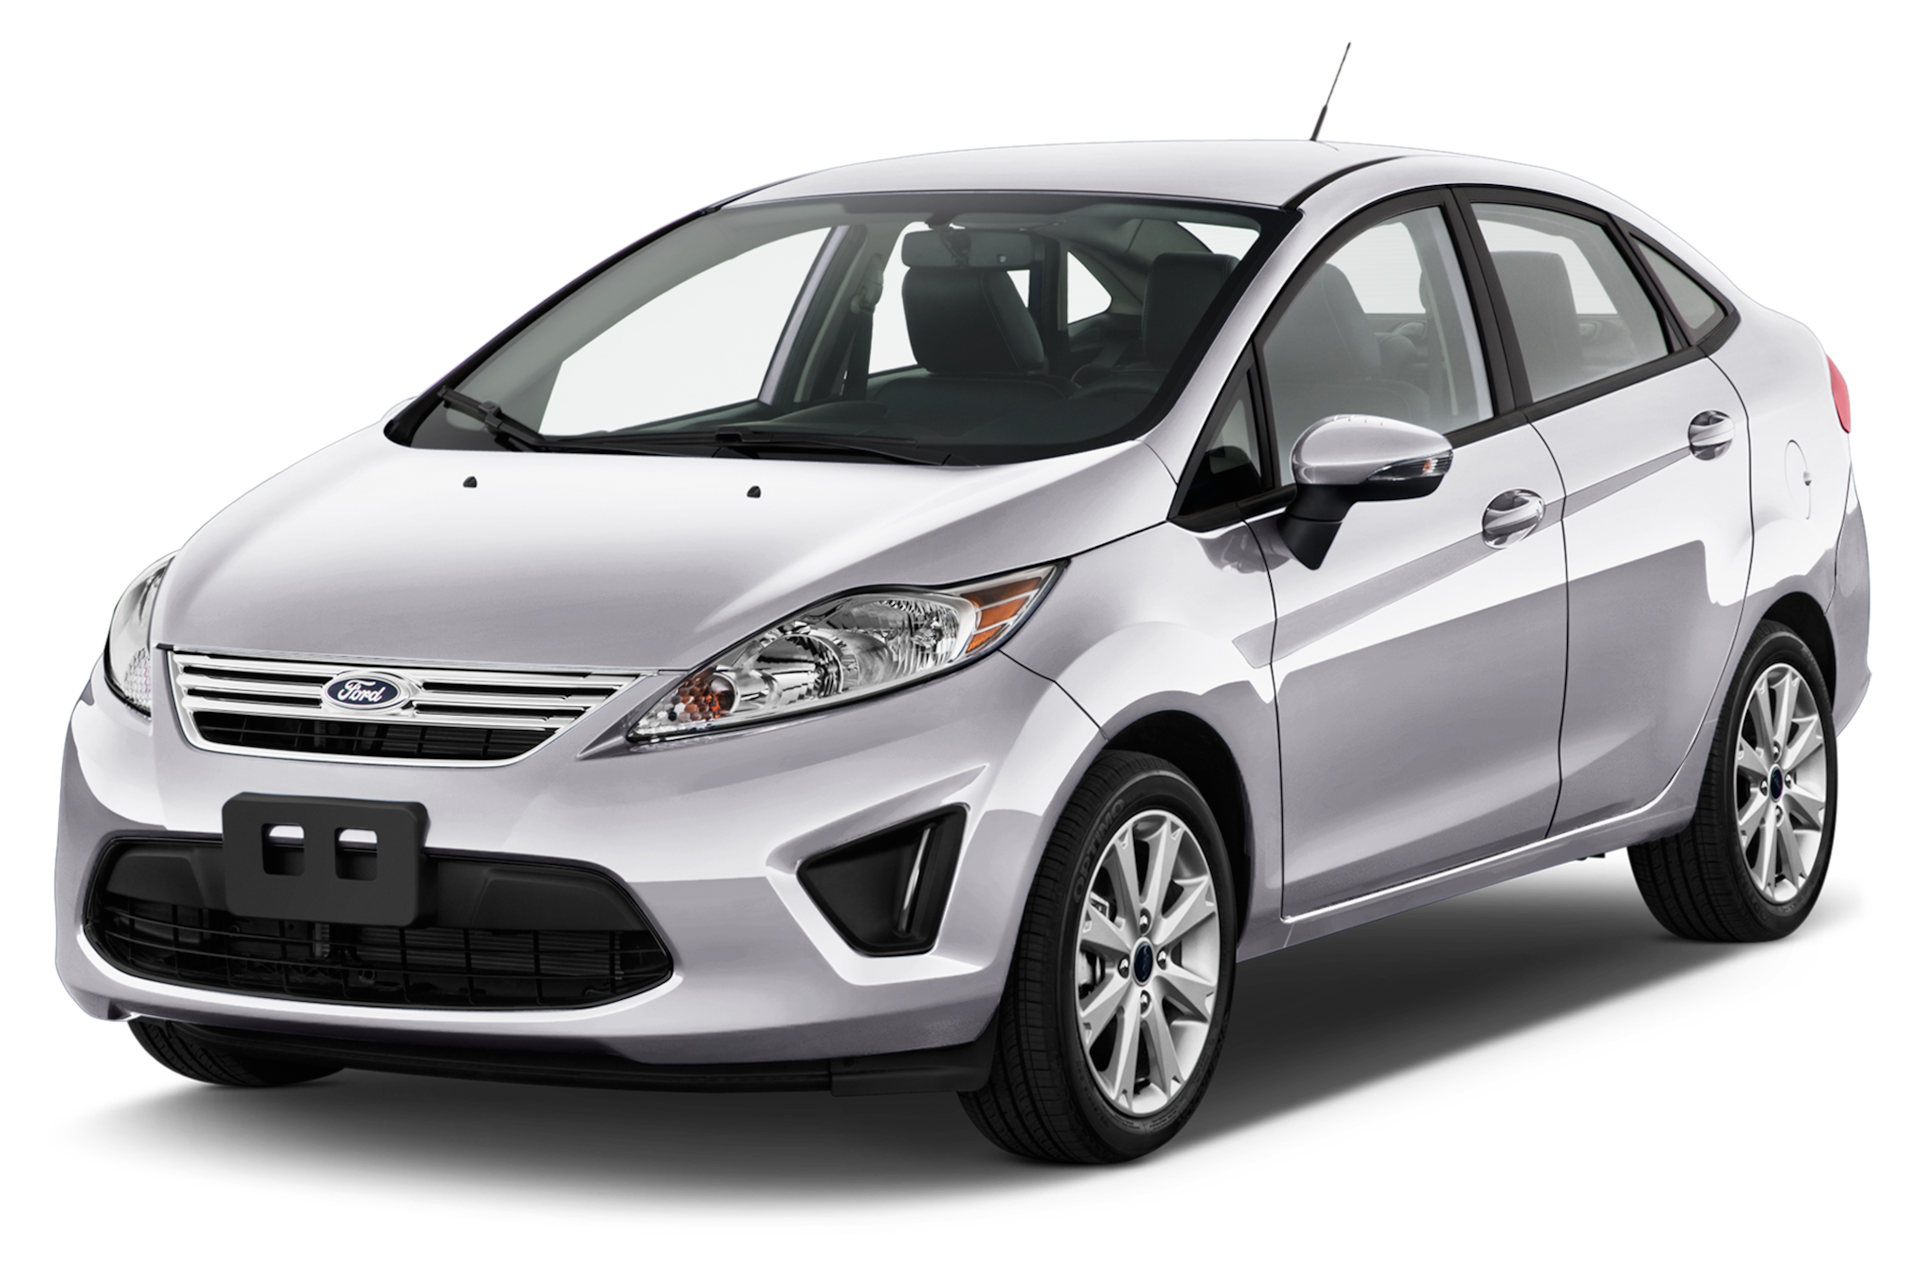 2013 Ford Fiesta Prices, Reviews, and Photos - MotorTrend